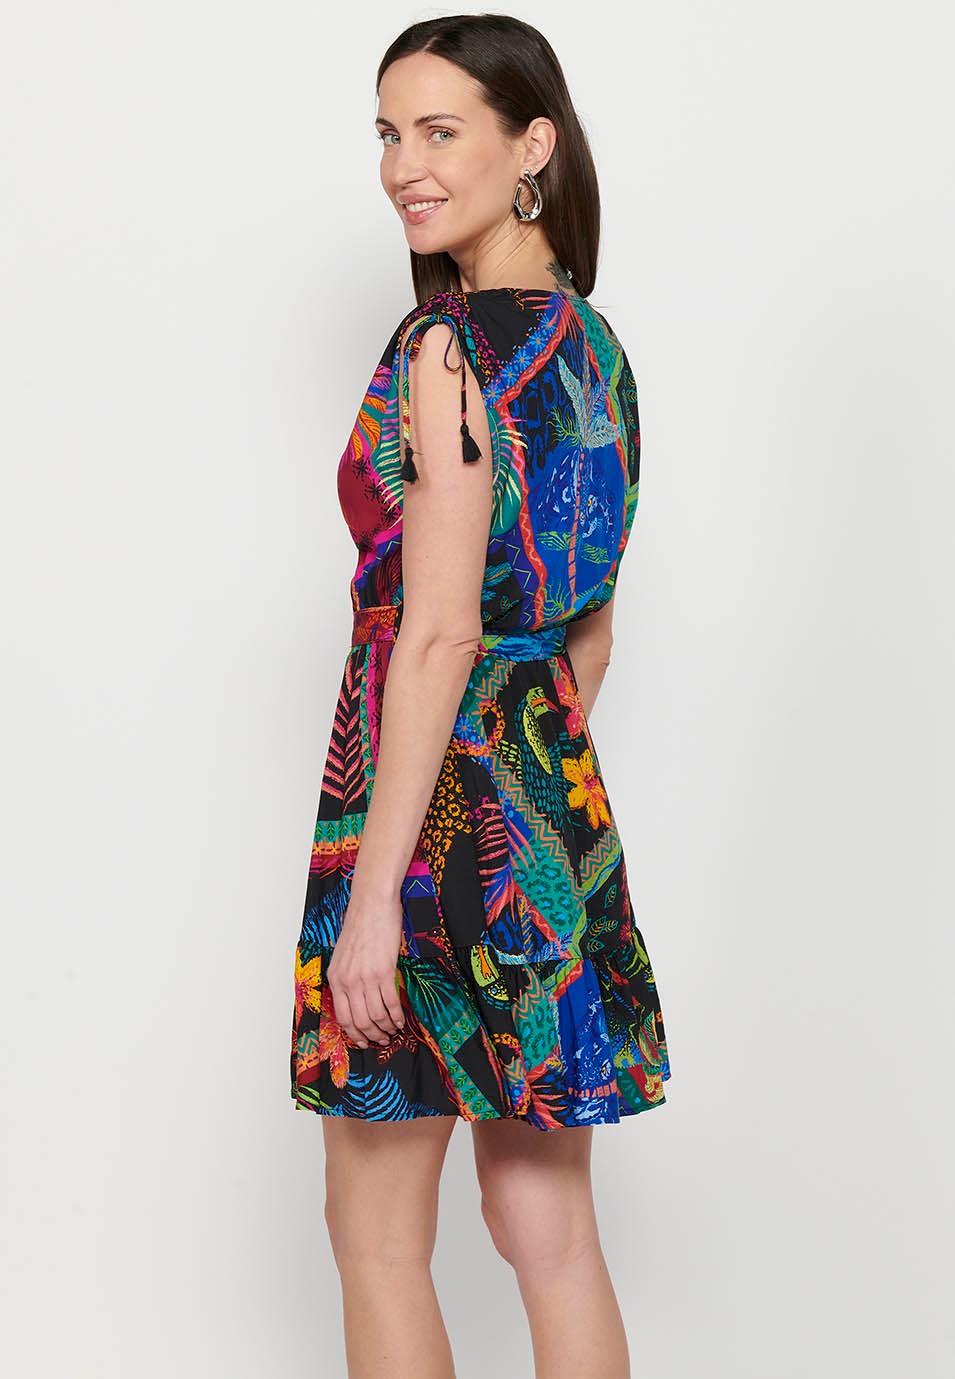 Short sleeveless dress with V-neckline and ethnic print with Multicolor shoulder details for Women 2